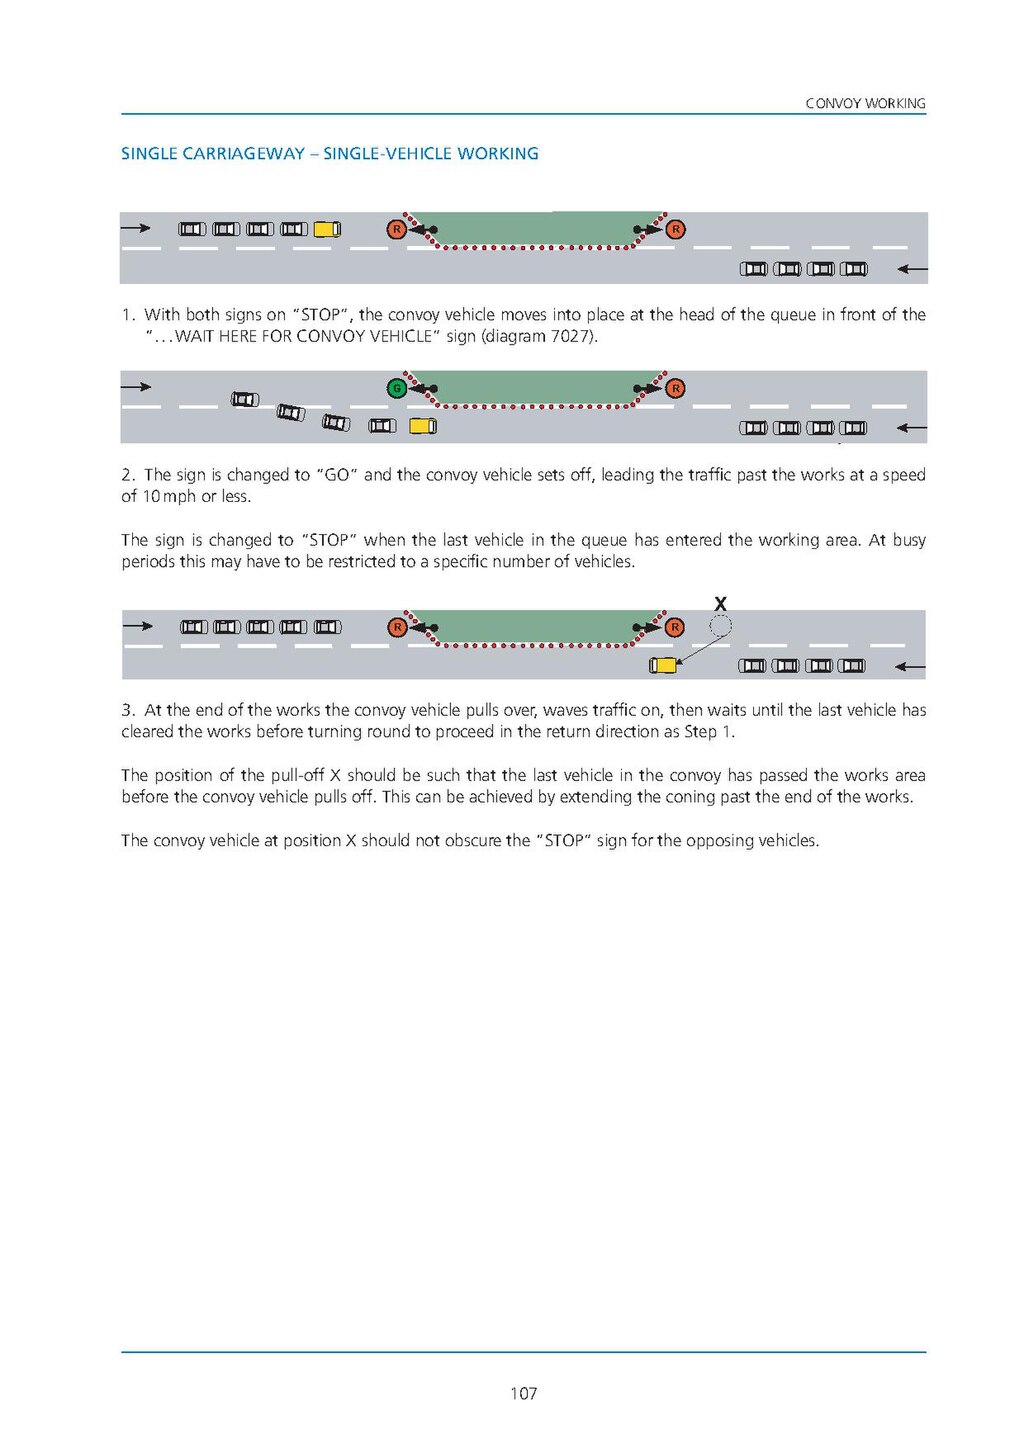 chapter 8 traffic signs manual part 3